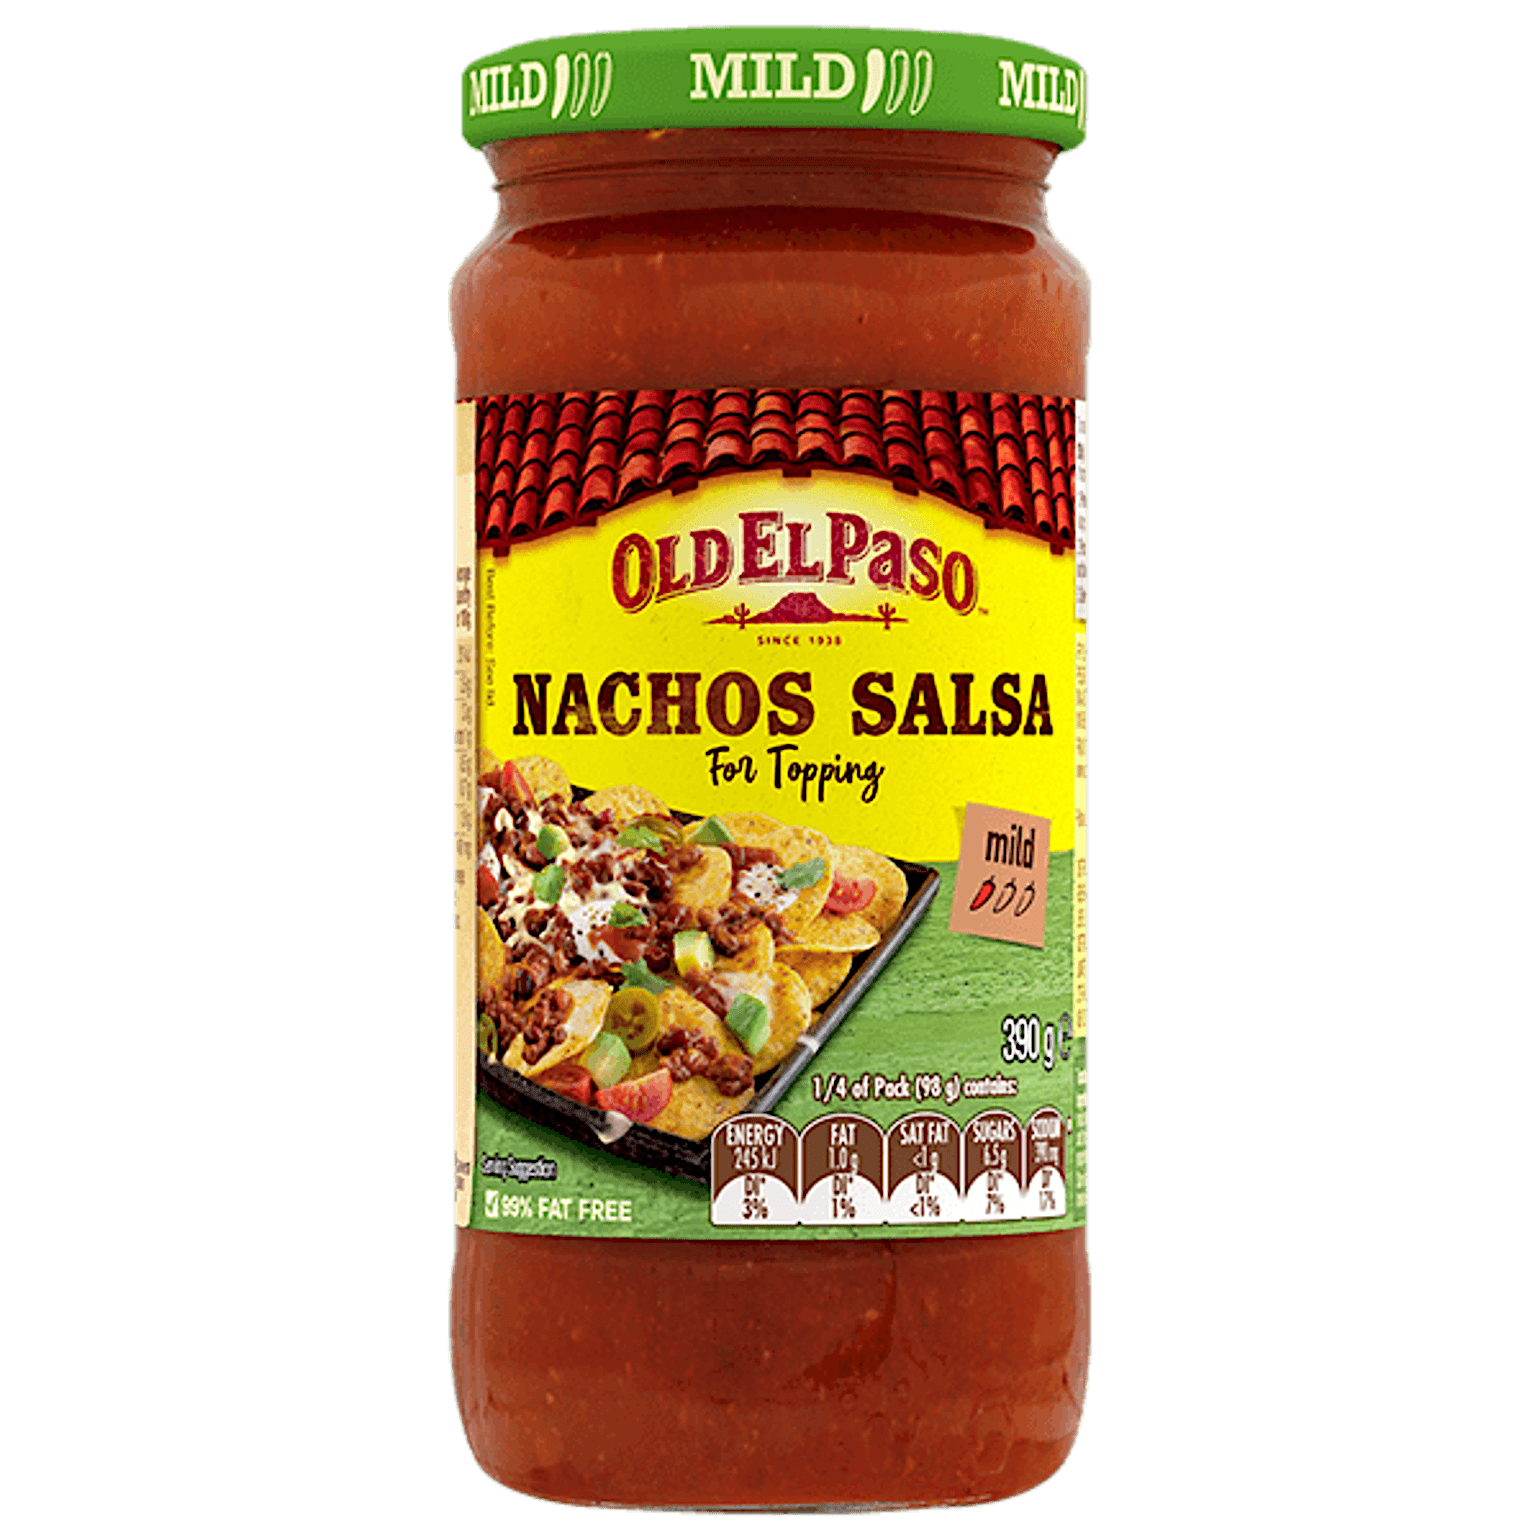 a glass jar of Old El Paso's mild nachos salsa for topping (390g)